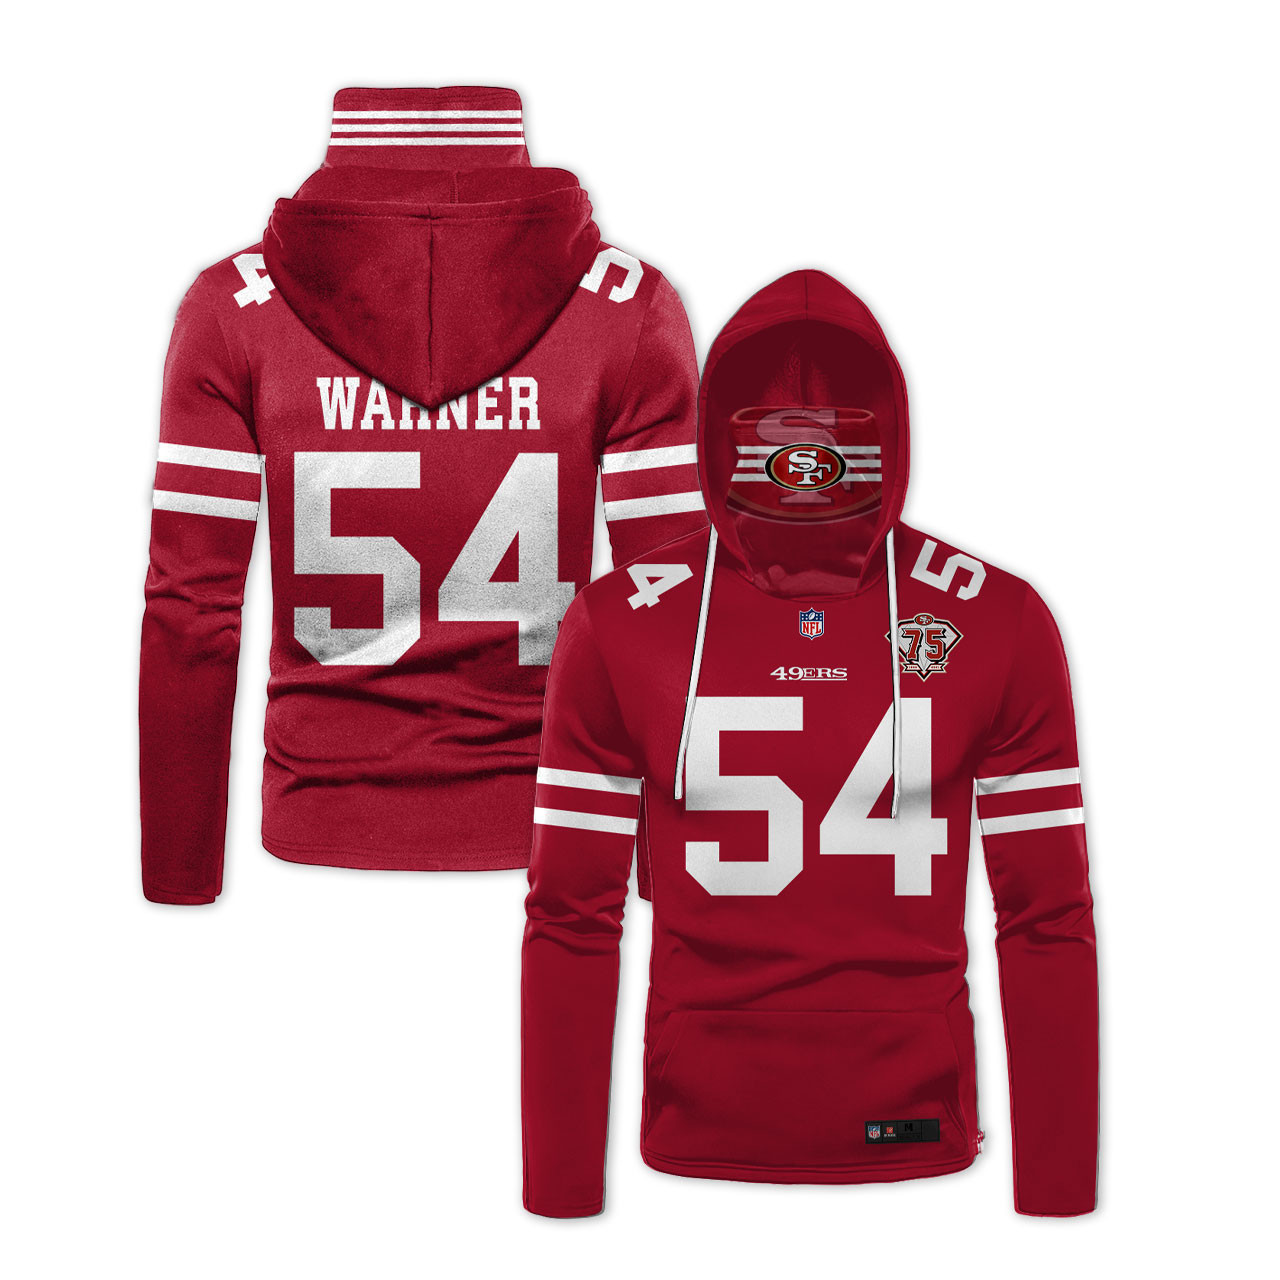 San Francisco 49ers Nfl Football Personalized Number Name White Style Gift For 49ers And Football Fans Hoodie